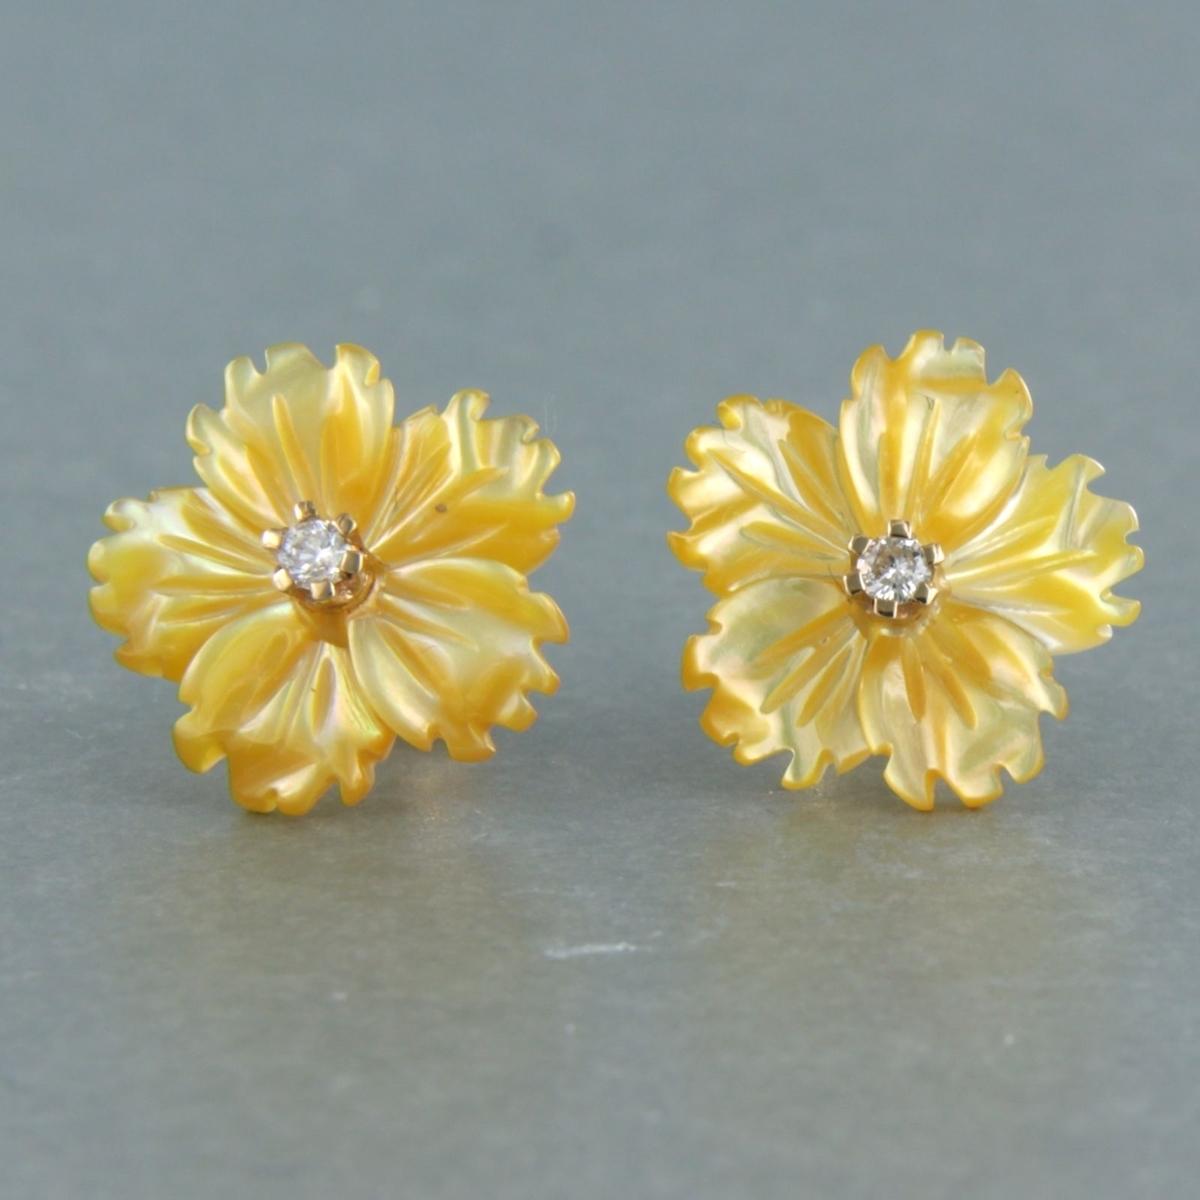 18k rose gold ear studs with flower-cut yellow agate and brilliant cut diamond 0.08 ct - G/H - VS/SI

detailed description:

the top of the ear stud is 1.4 cm wide

weight 2.0 grams

set with

- 2 x 1.4 mm flower shape cut agate

color yellow
purity